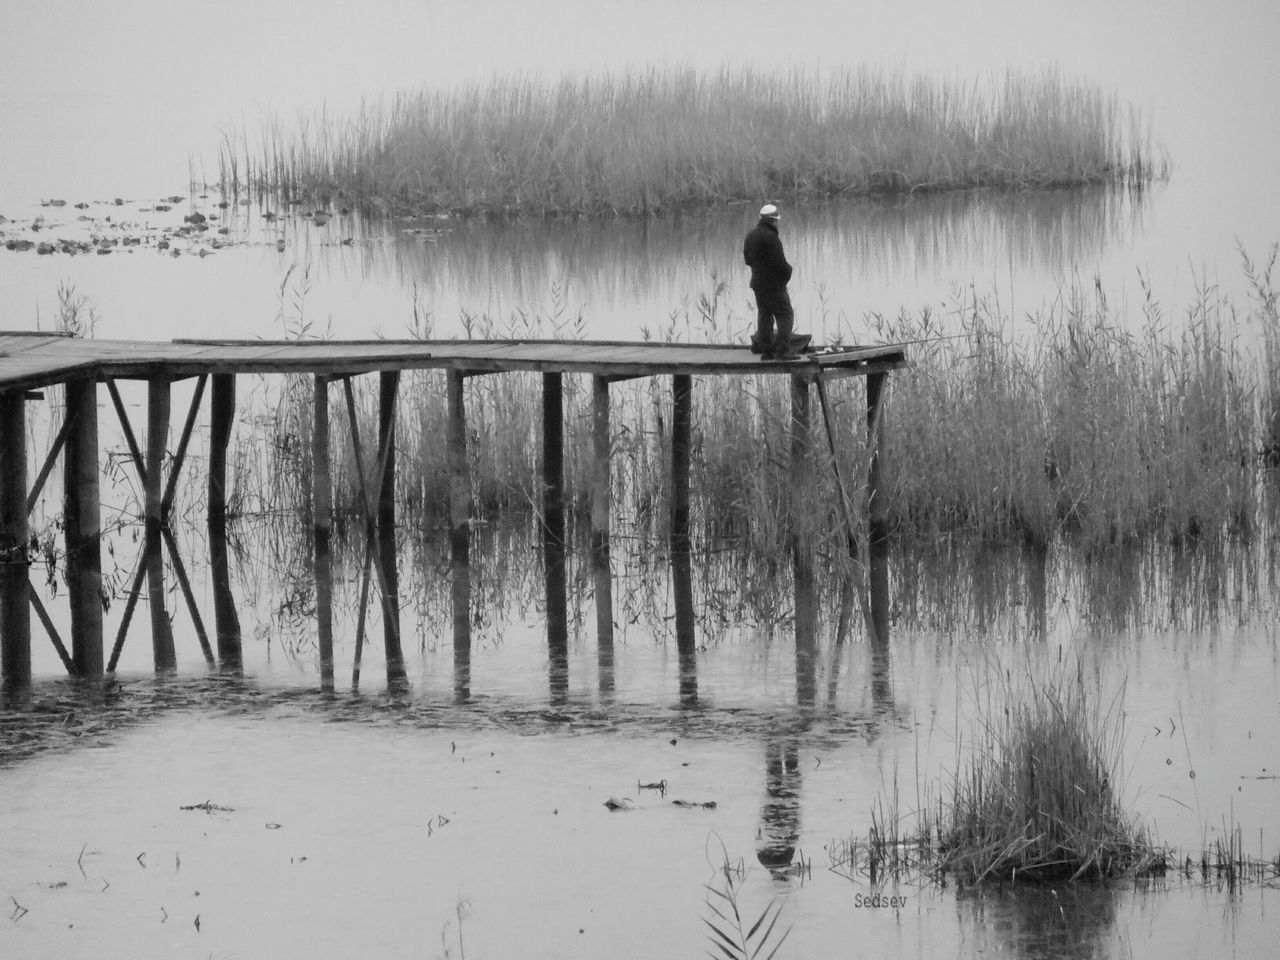 water, lifestyles, men, reflection, leisure activity, lake, full length, rear view, standing, pier, tranquility, nature, silhouette, walking, tranquil scene, person, day